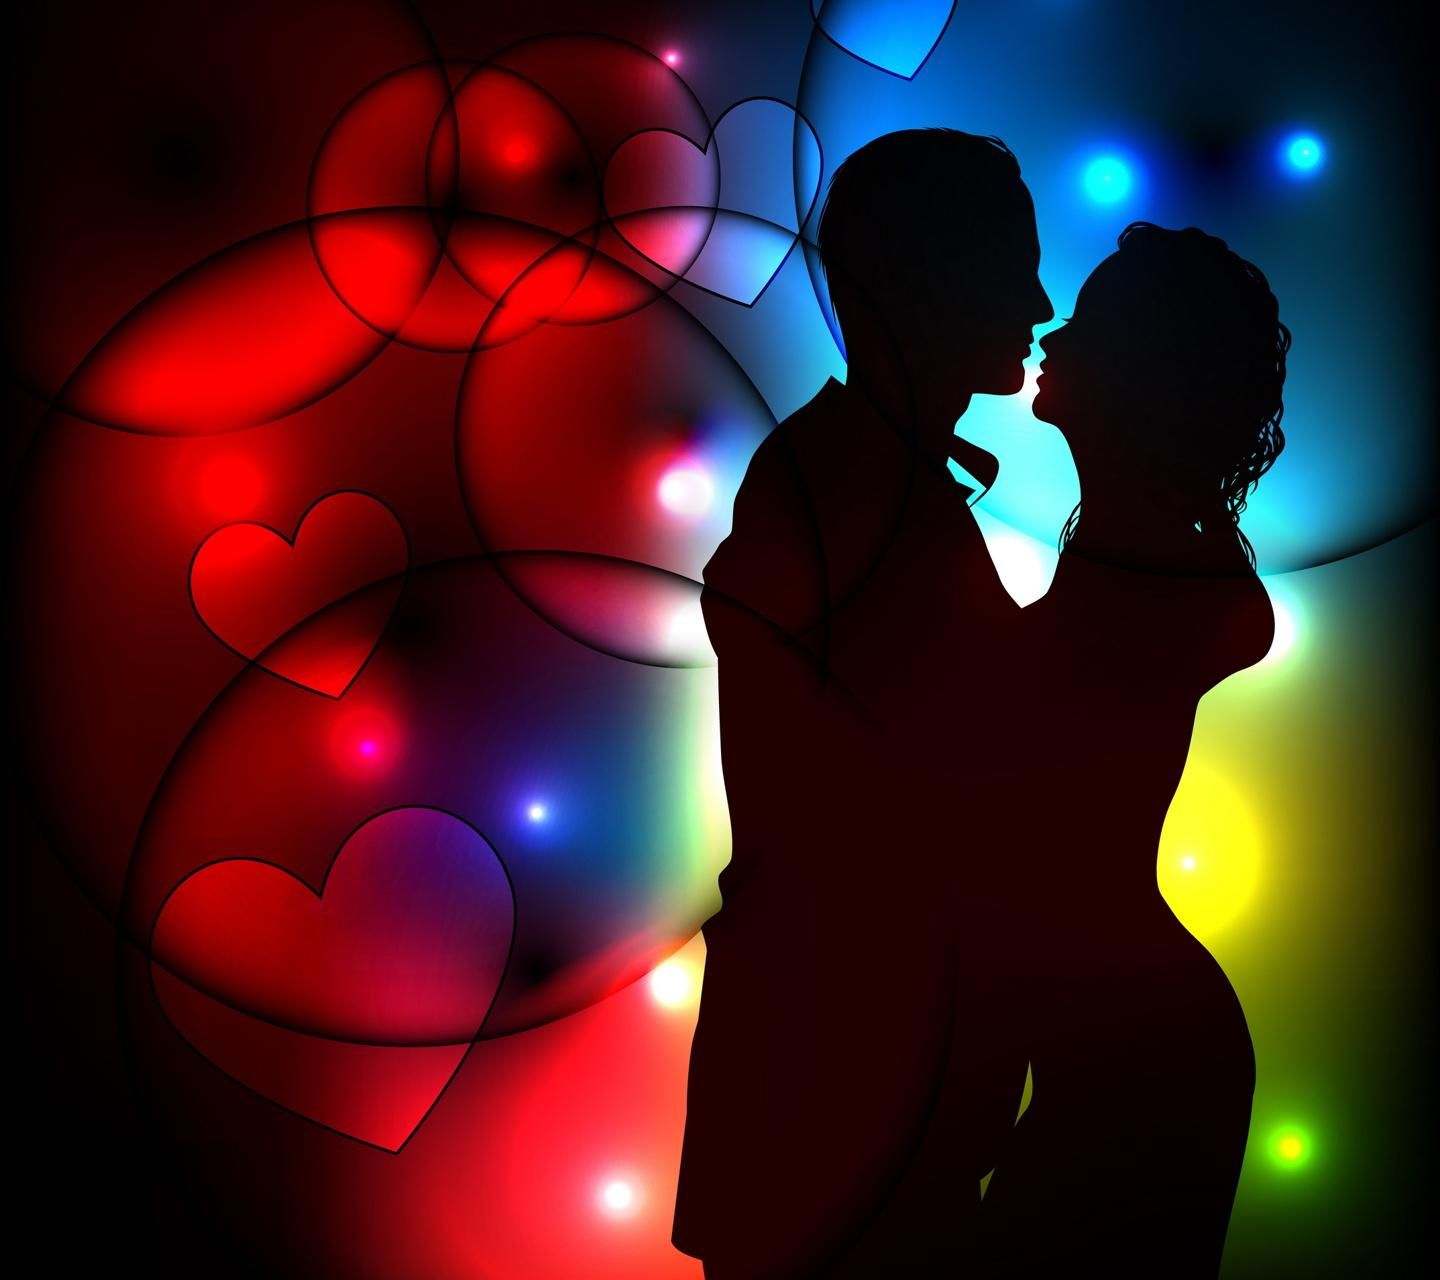 Download Loving and dancing couple HD wallpaper for mobile day wallpaper for your mobile cell phone